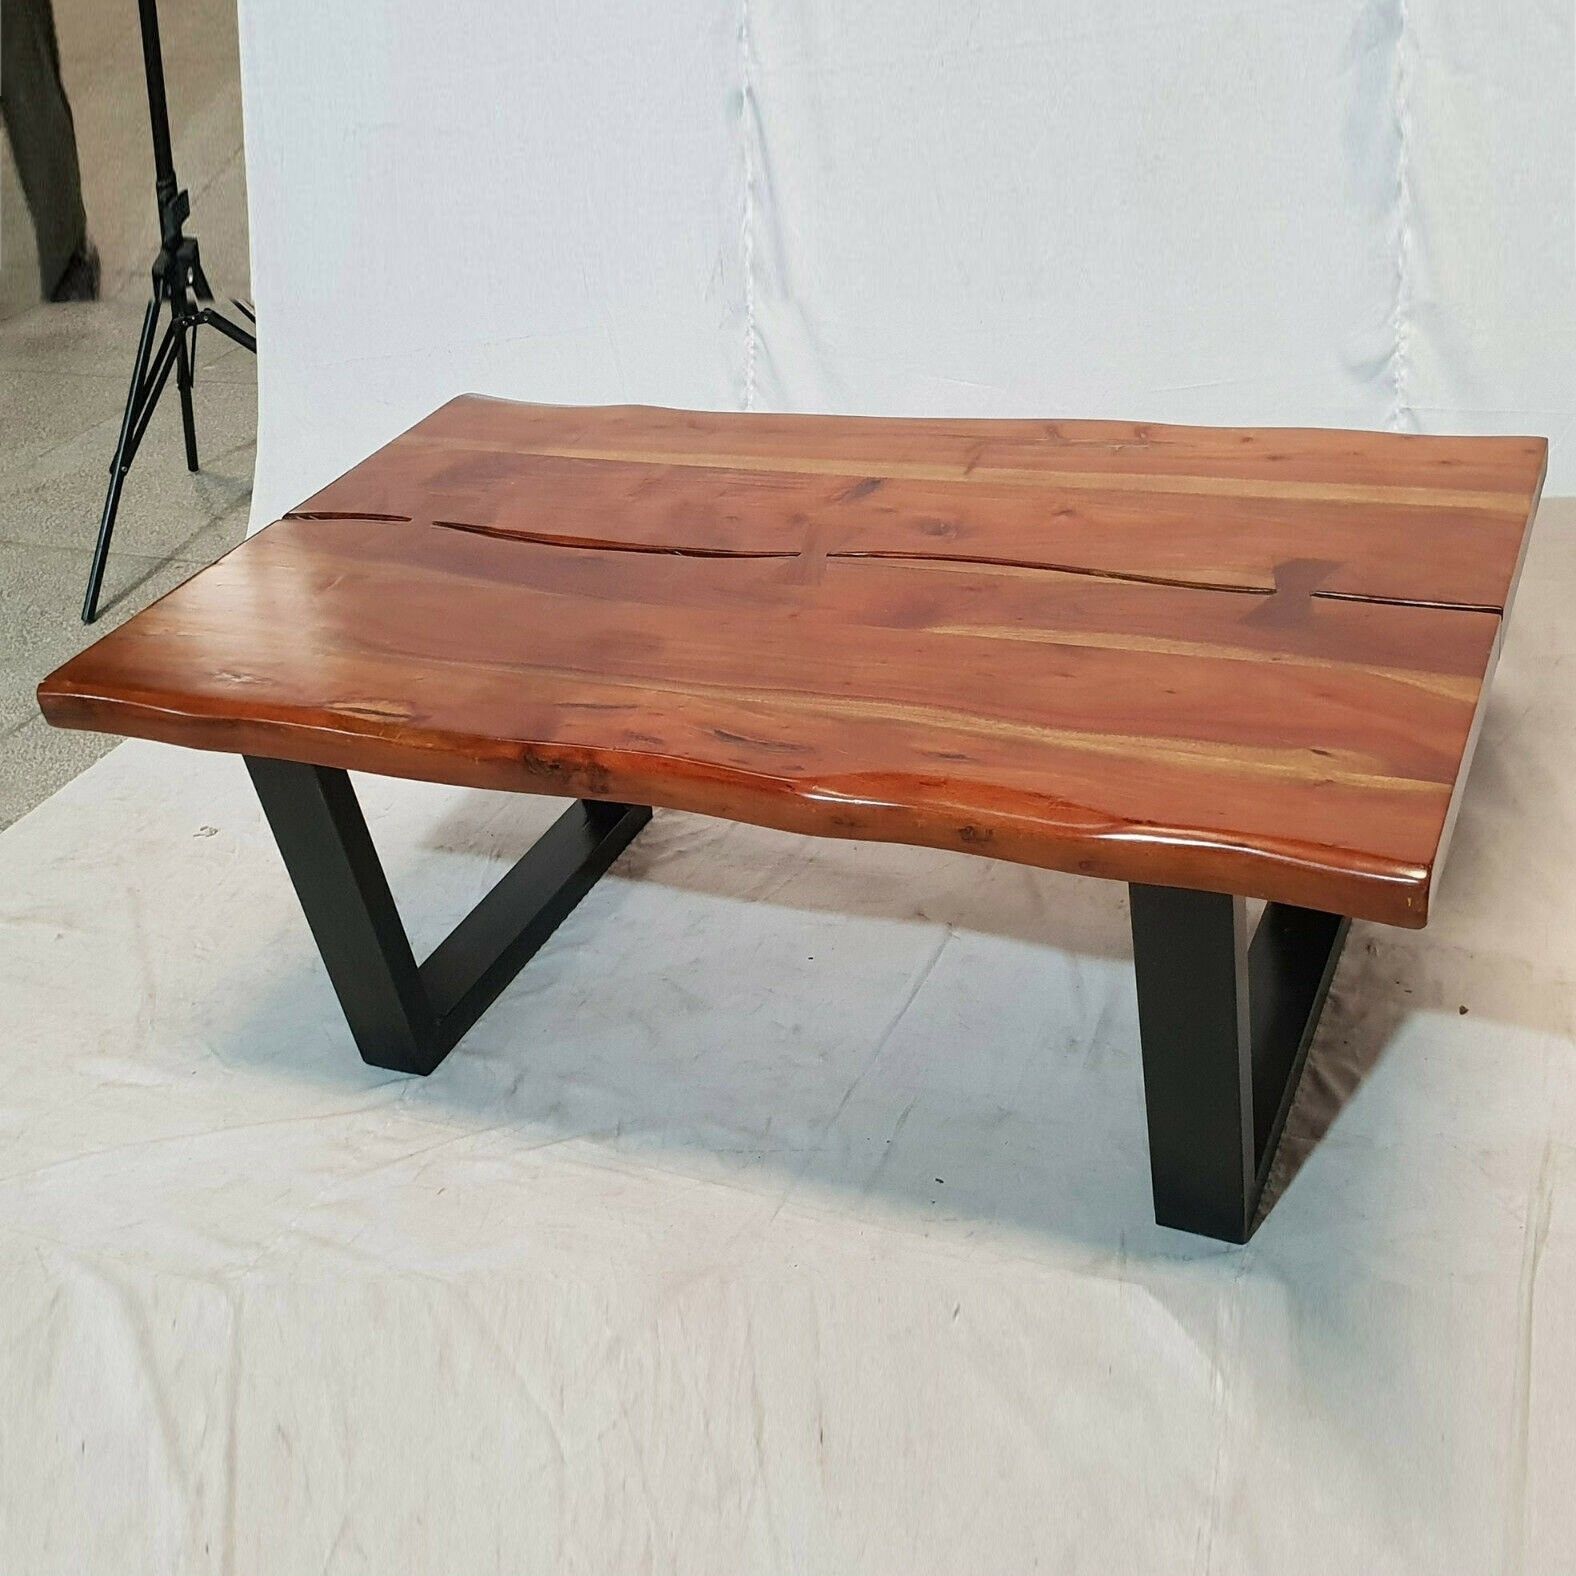 Solid Acacia Wood Live Edge Coffee Table Industrial Metal Legs 122 X 76cm Throughout Acacia Wood Coffee Tables (View 20 of 20)